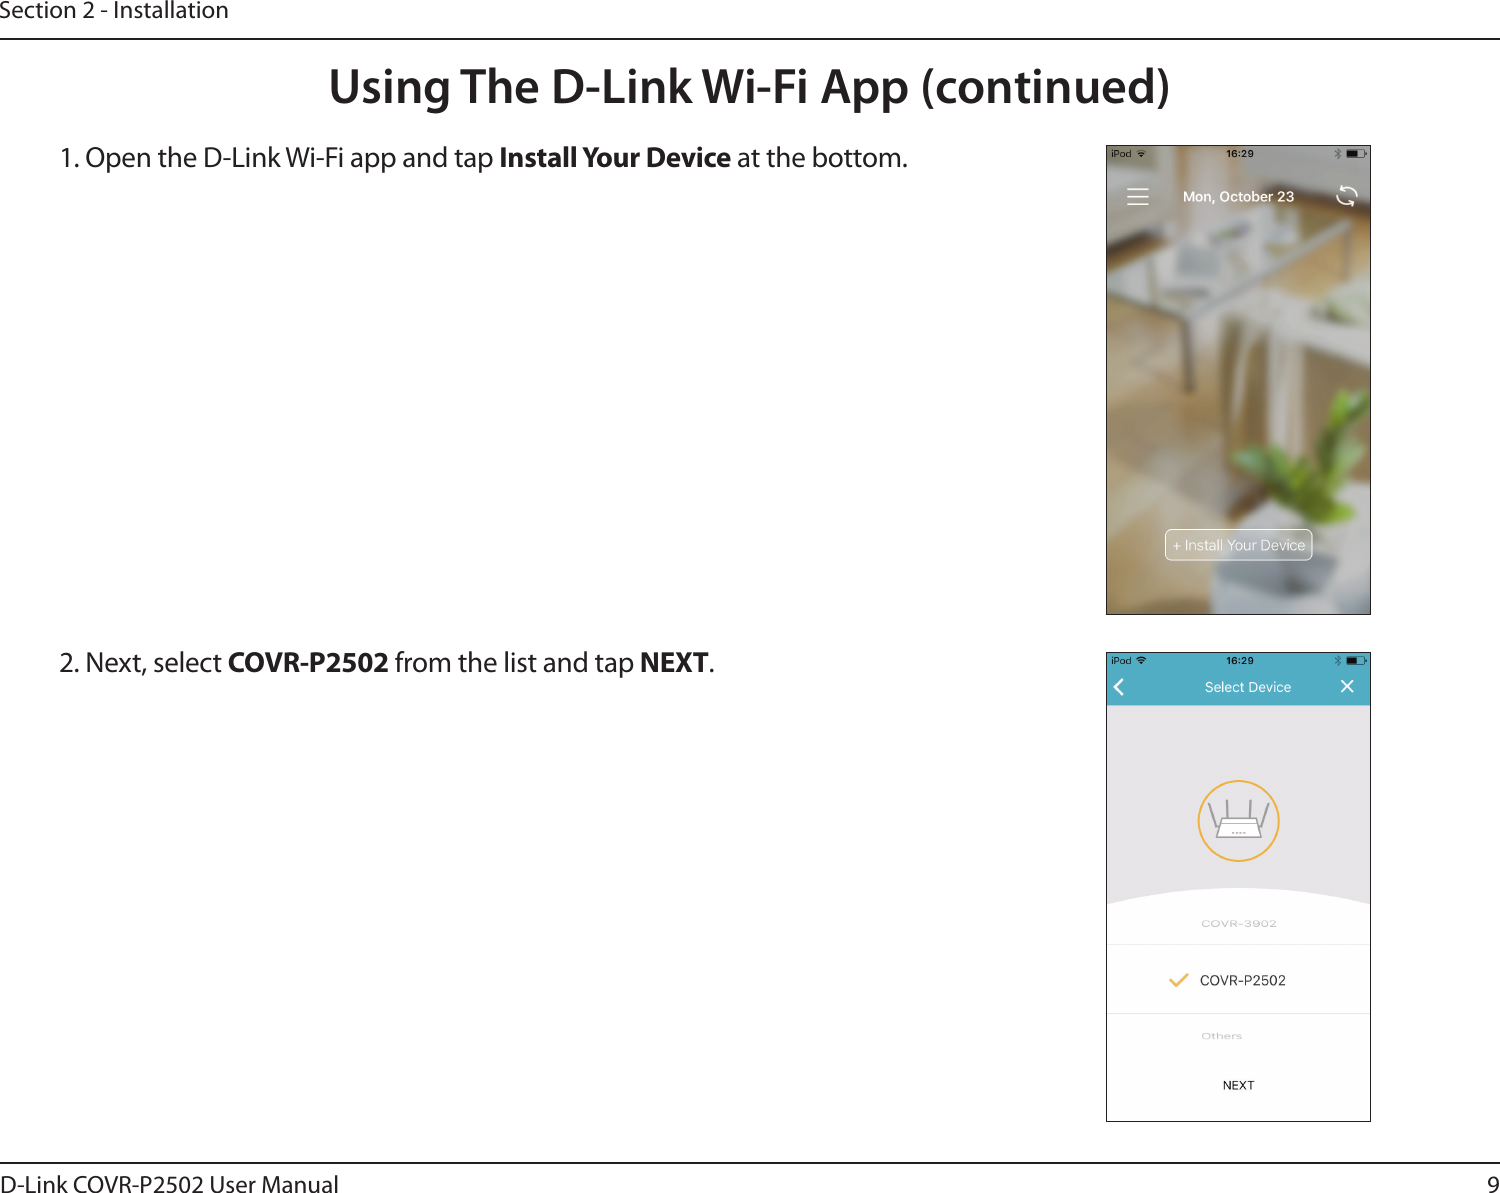 9D-Link COVR-P2502 User ManualSection 2 - InstallationUsing The D-Link Wi-Fi App (continued)1. Open the D-Link Wi-Fi app and tap Install Your Device at the bottom.2. Next, select COVR-P2502 from the list and tap NEXT.